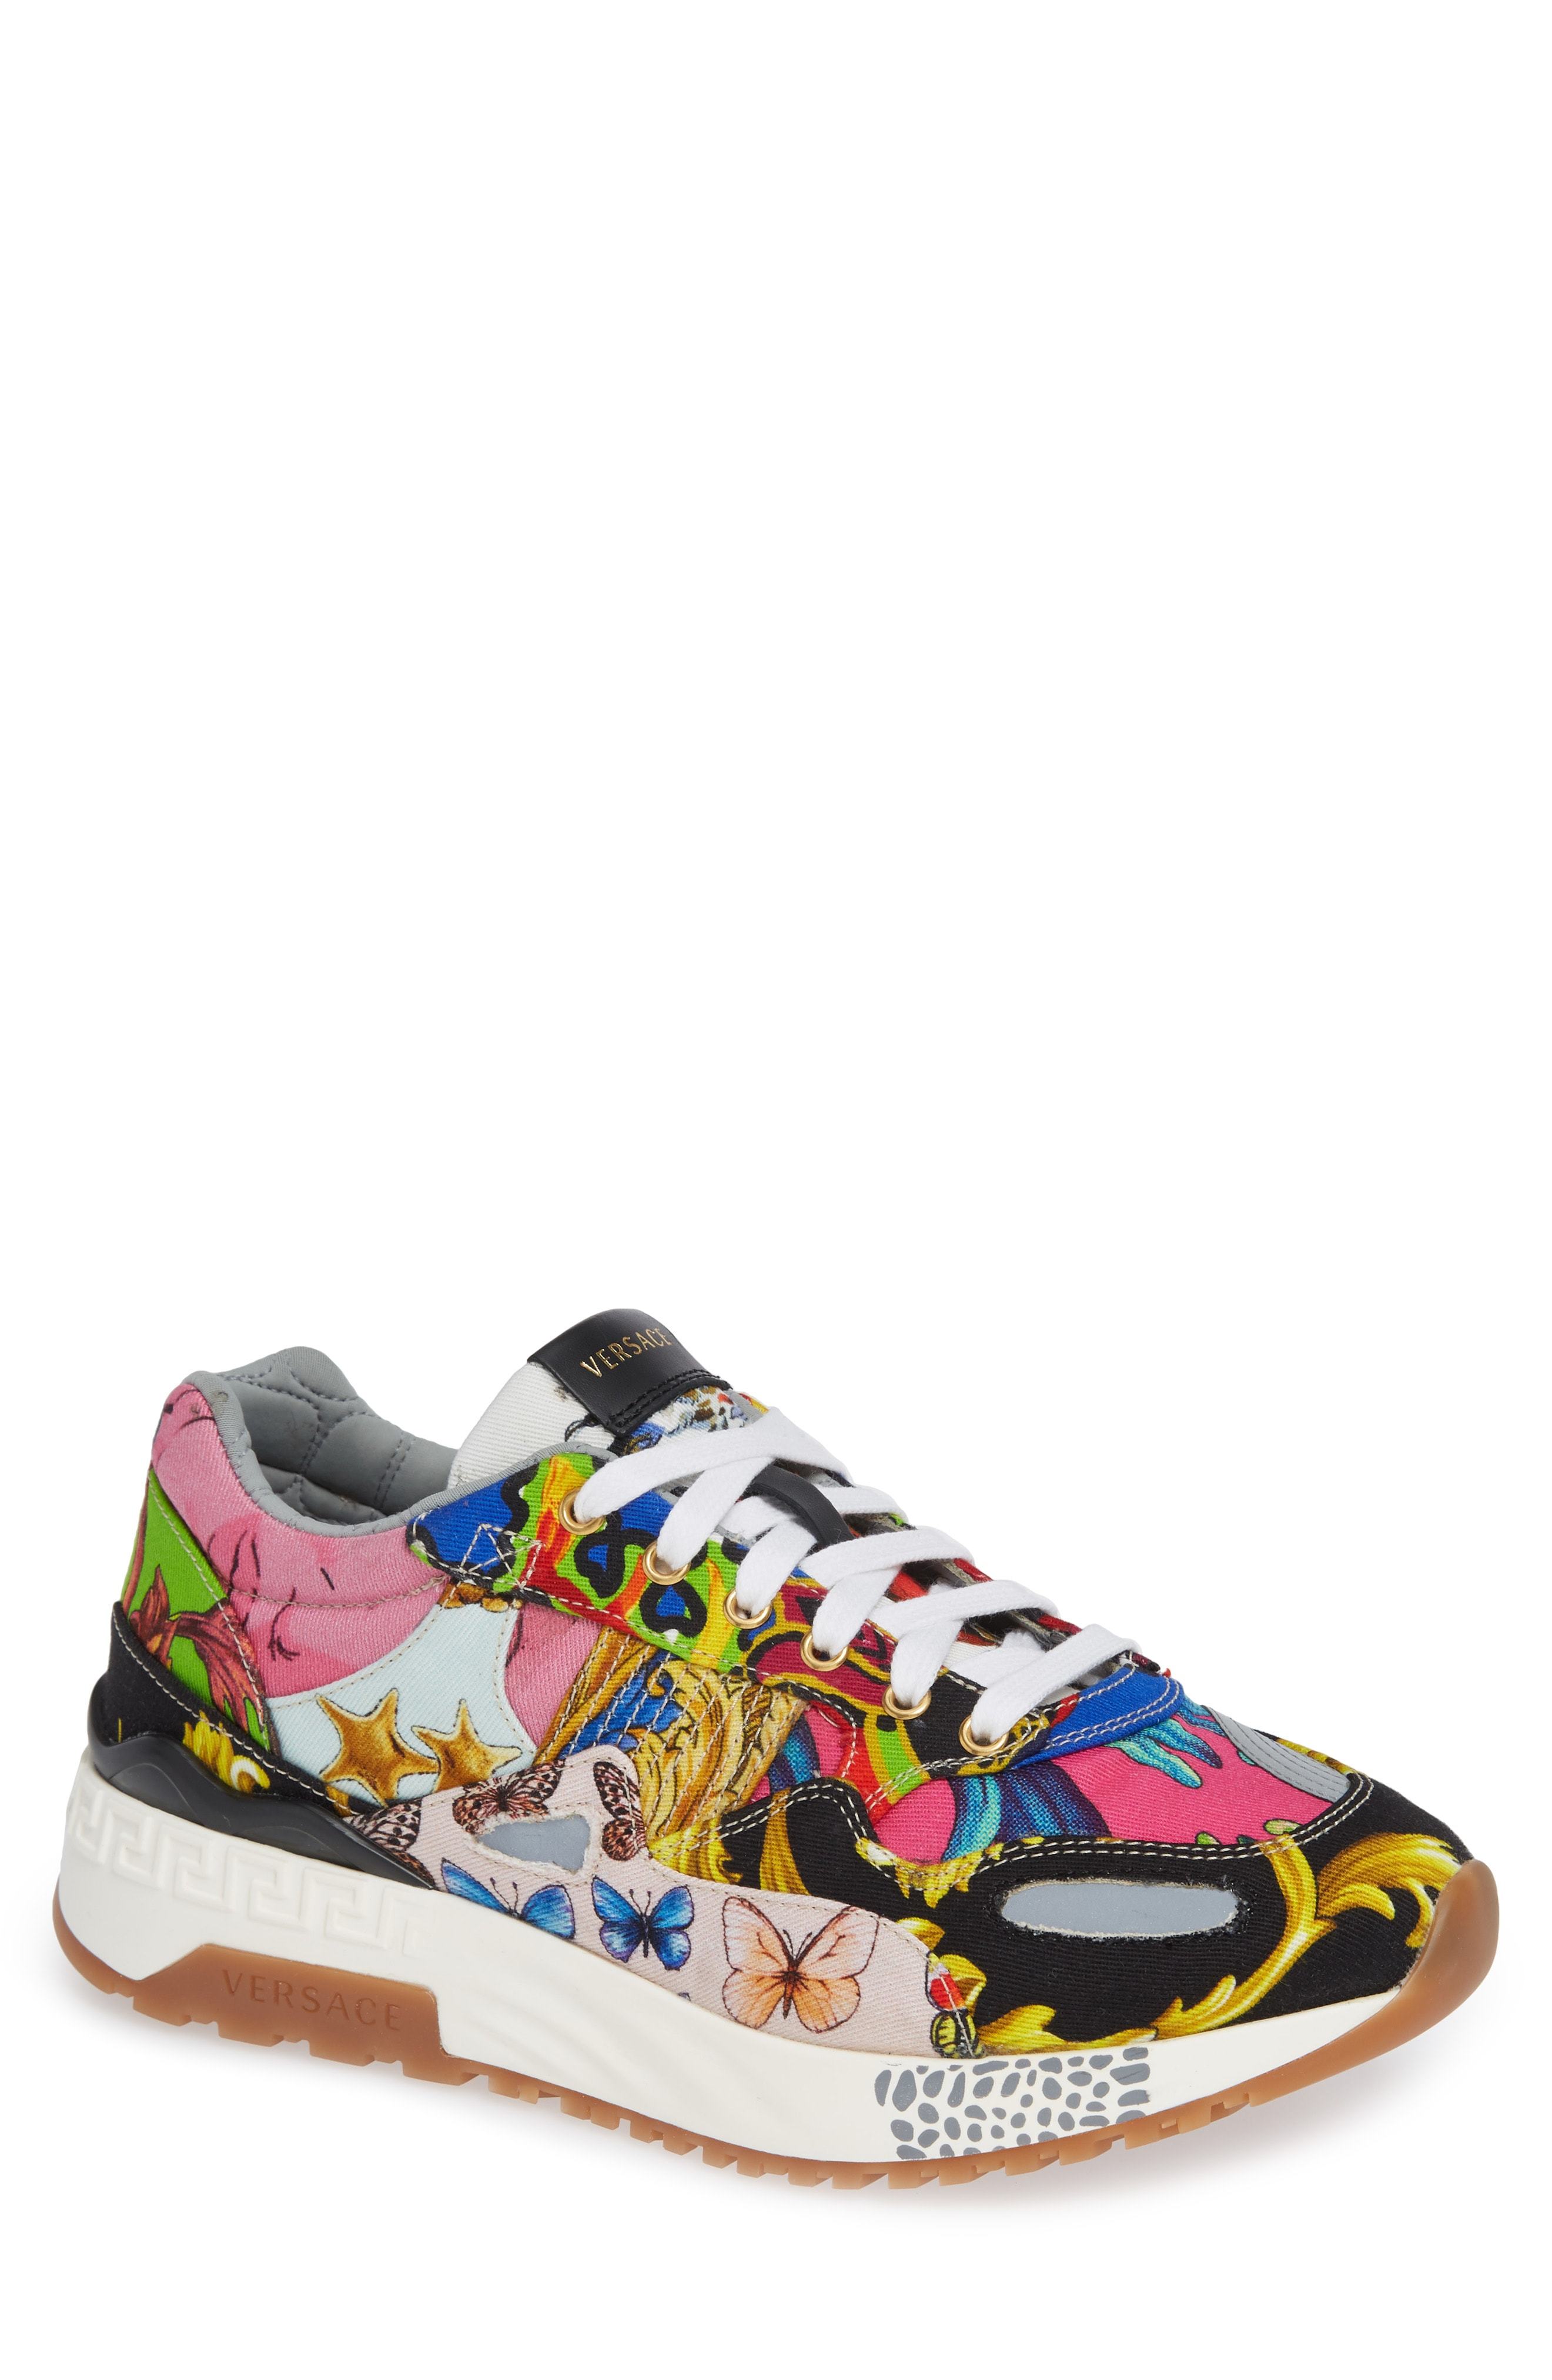 versace colorful shoes